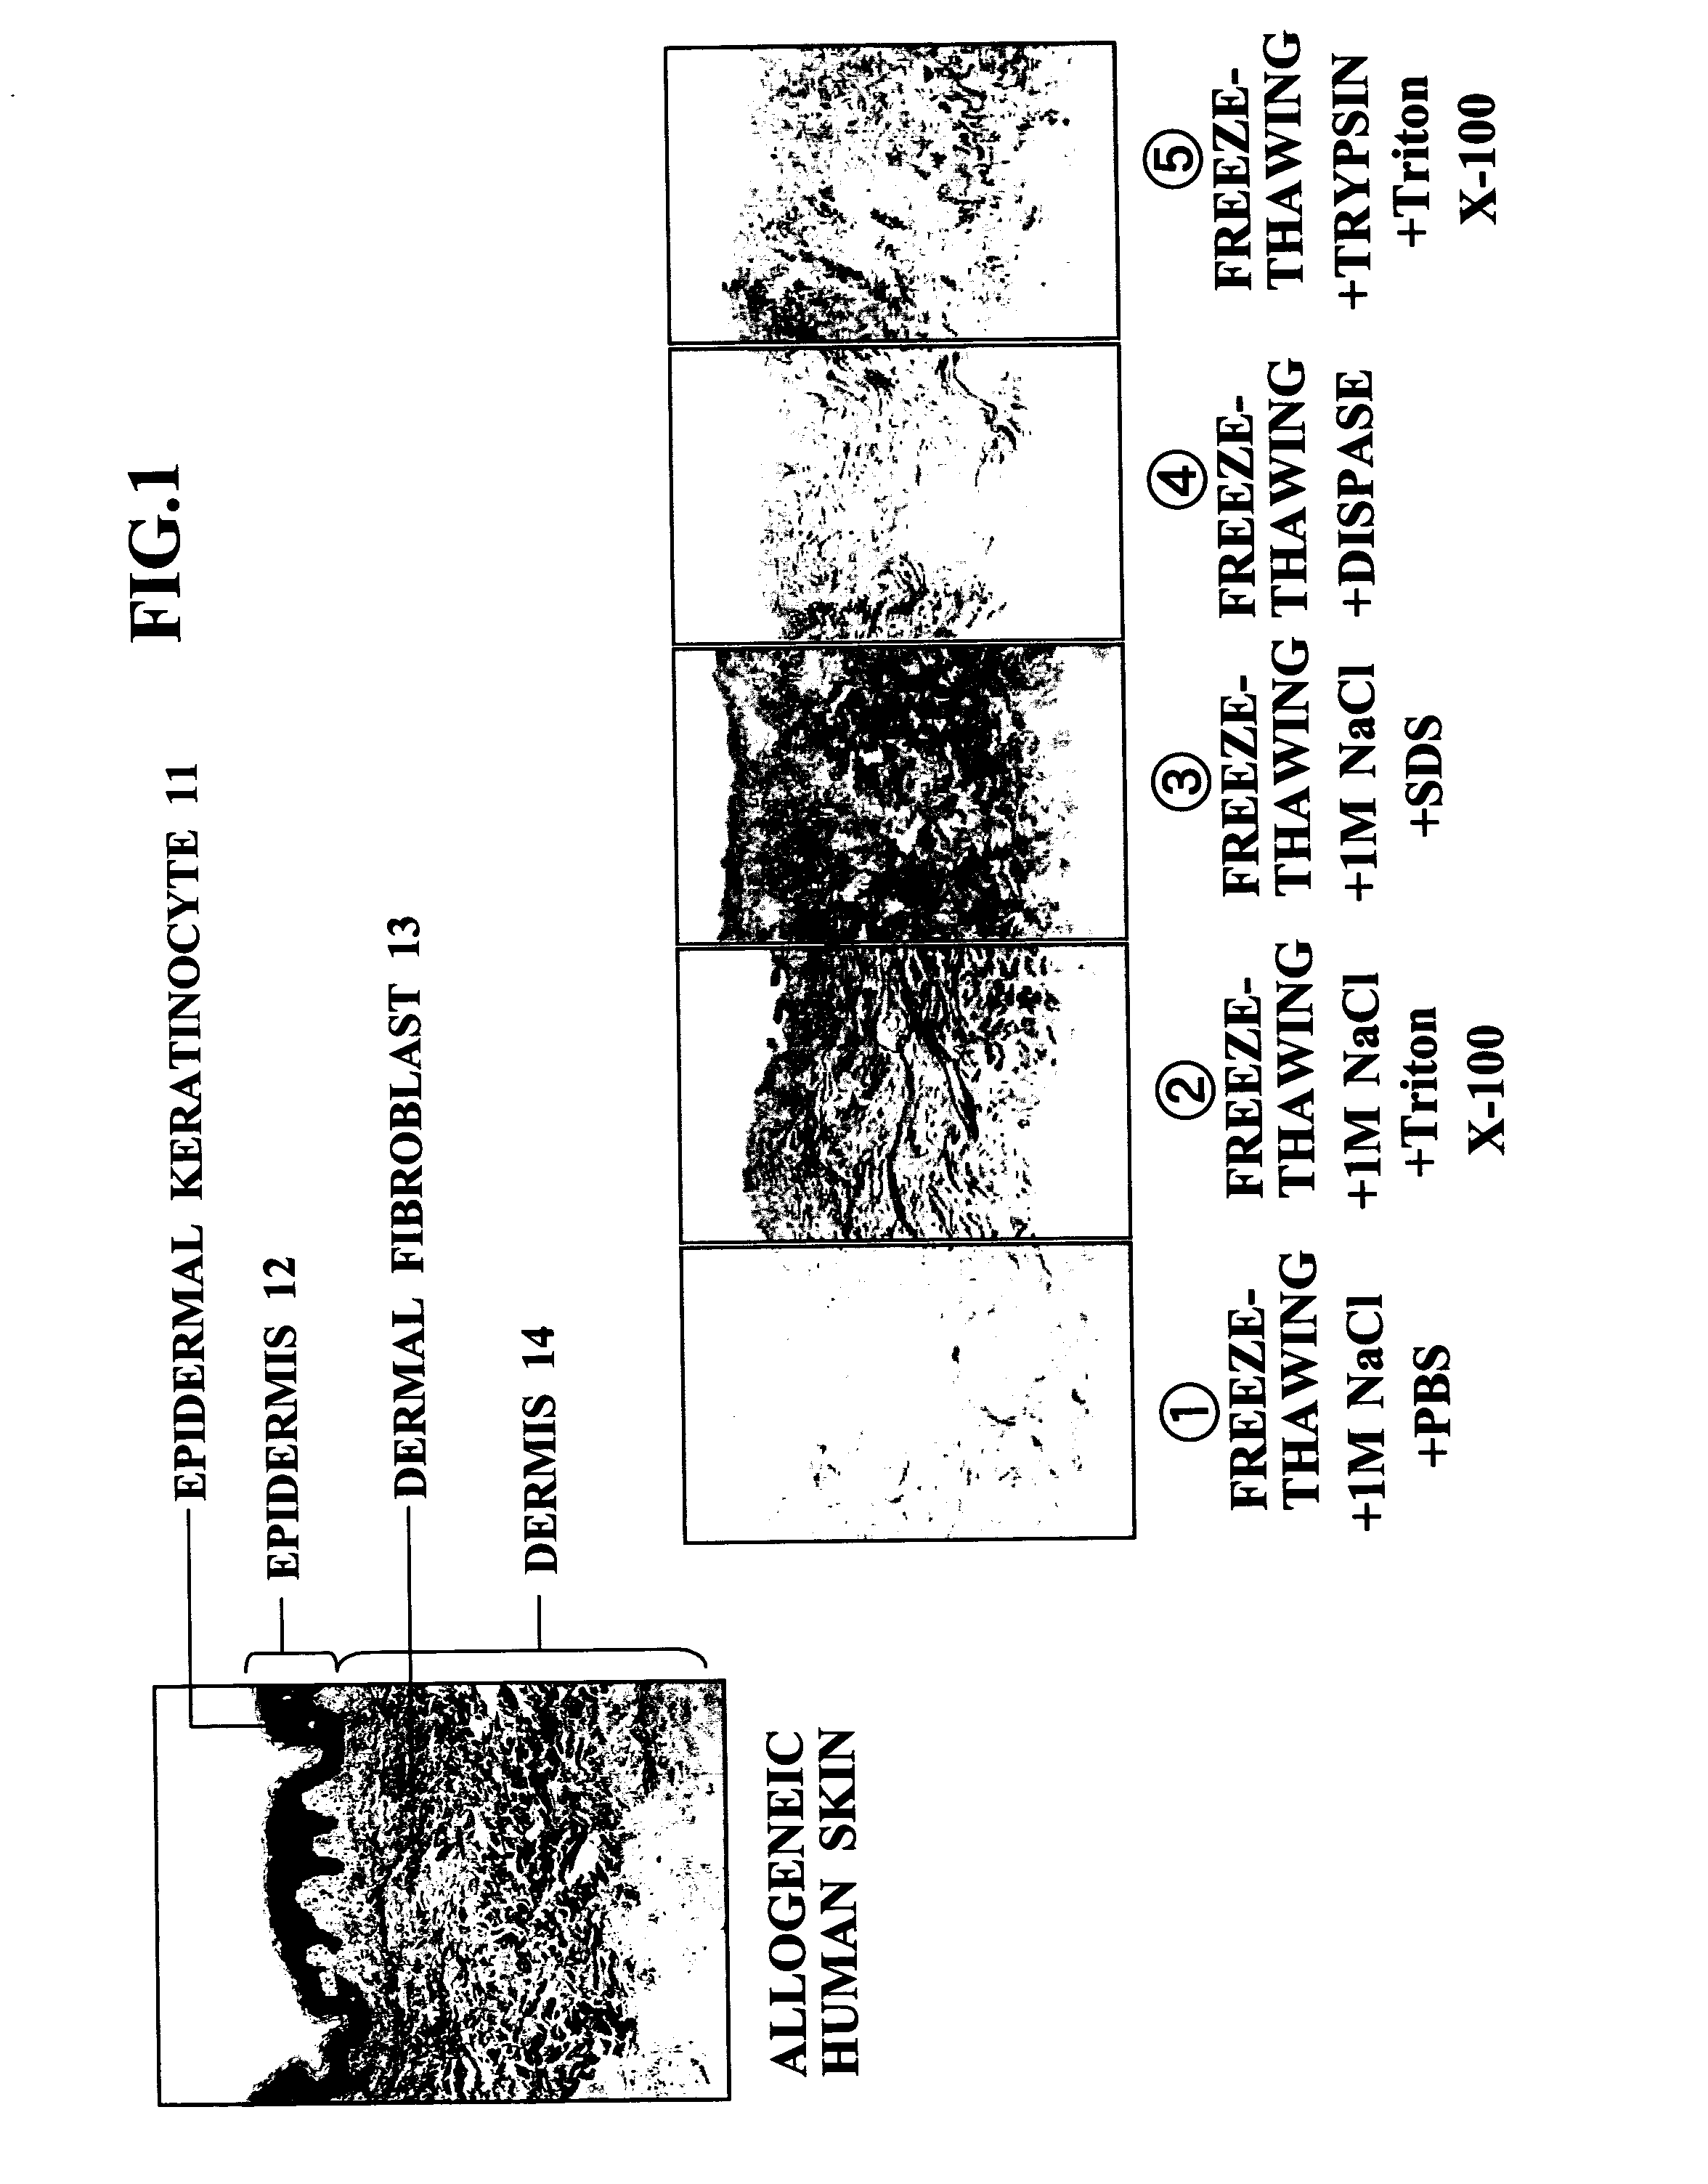 Method of Preparing Isolated Cell-Free Skin, Cell-Free Dermal Matrix, Method of Producing the Same and Composite Cultured Skin with The Use of the Cell-Free Dermal Matrix